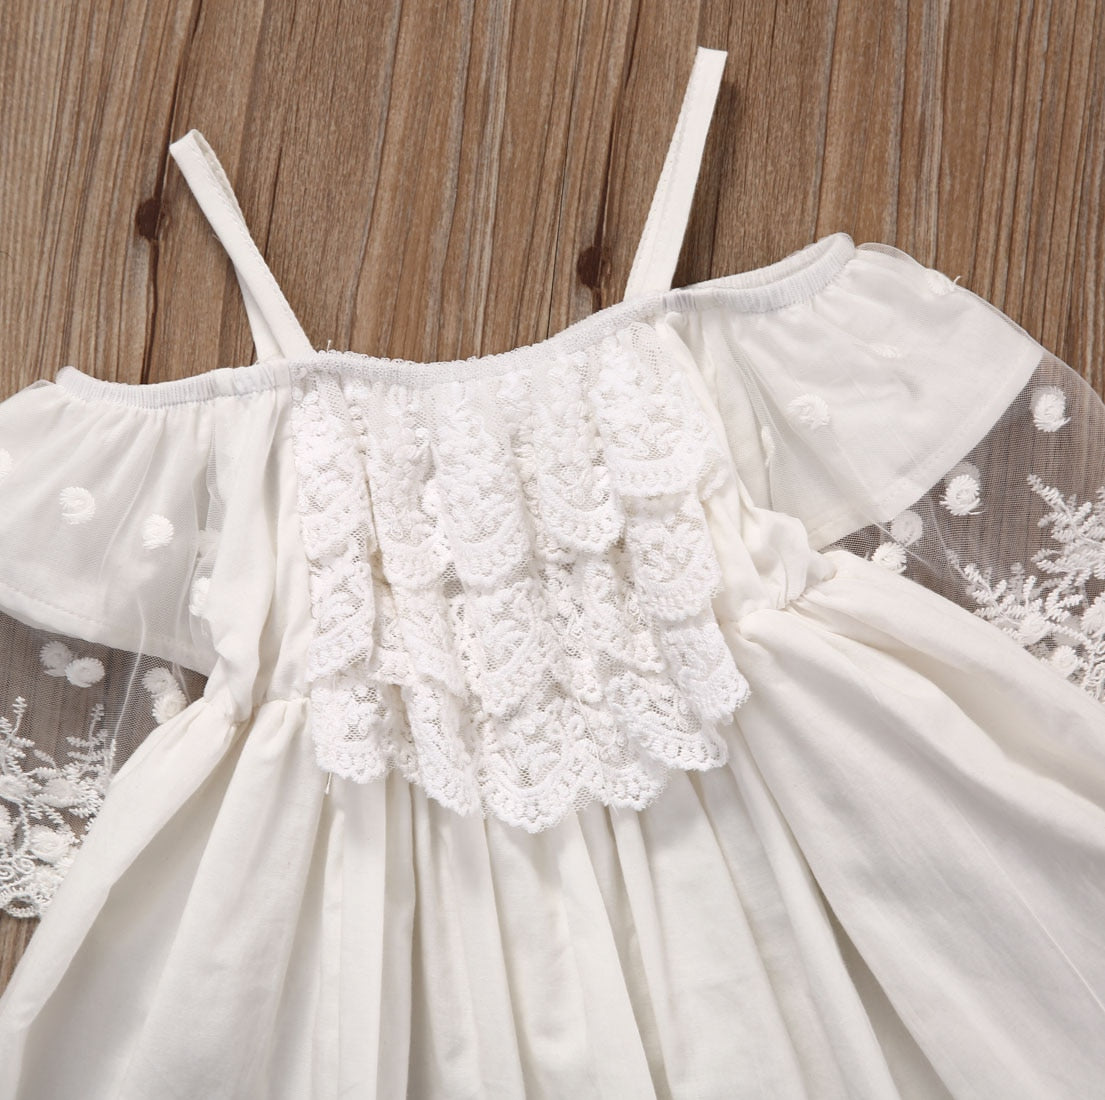 Toddler Kids Baby Girls Lace Dress Princess Party Pageant Holiday Elegant Dresses - ebowsos